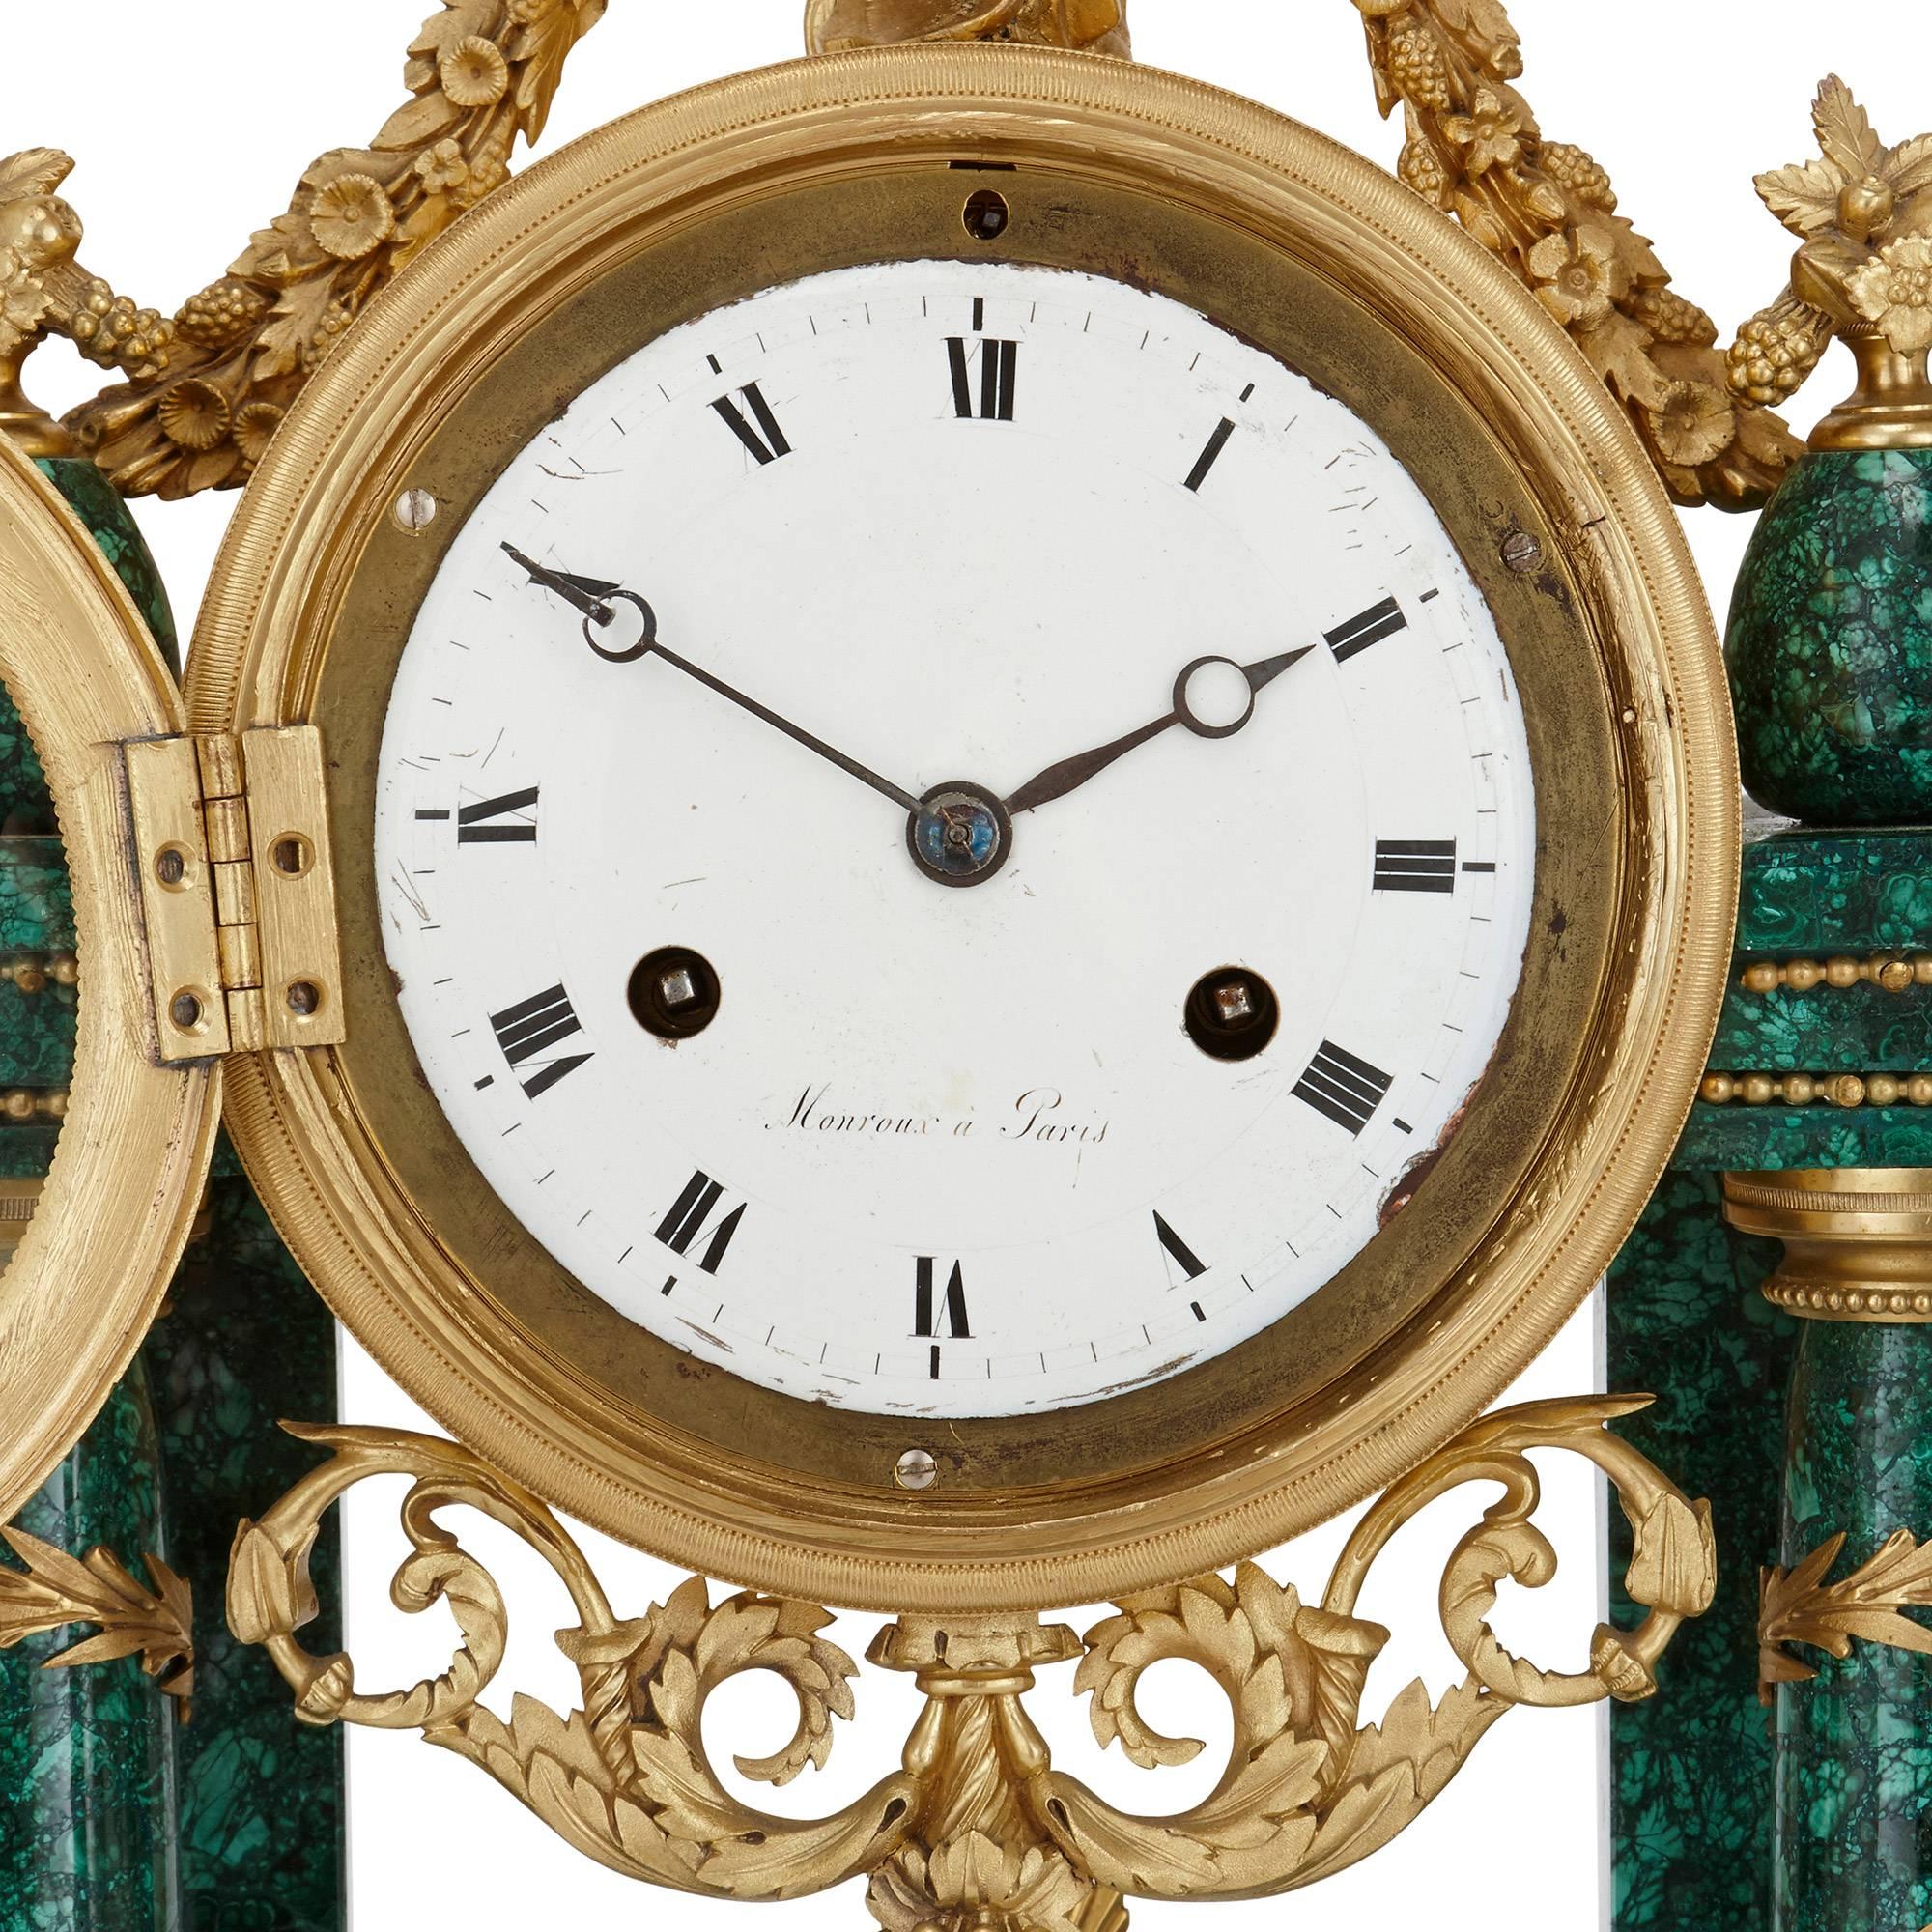 French Gilt Bronze Mounted Antique Malachite Mantel Clock from the Louis XVI Period